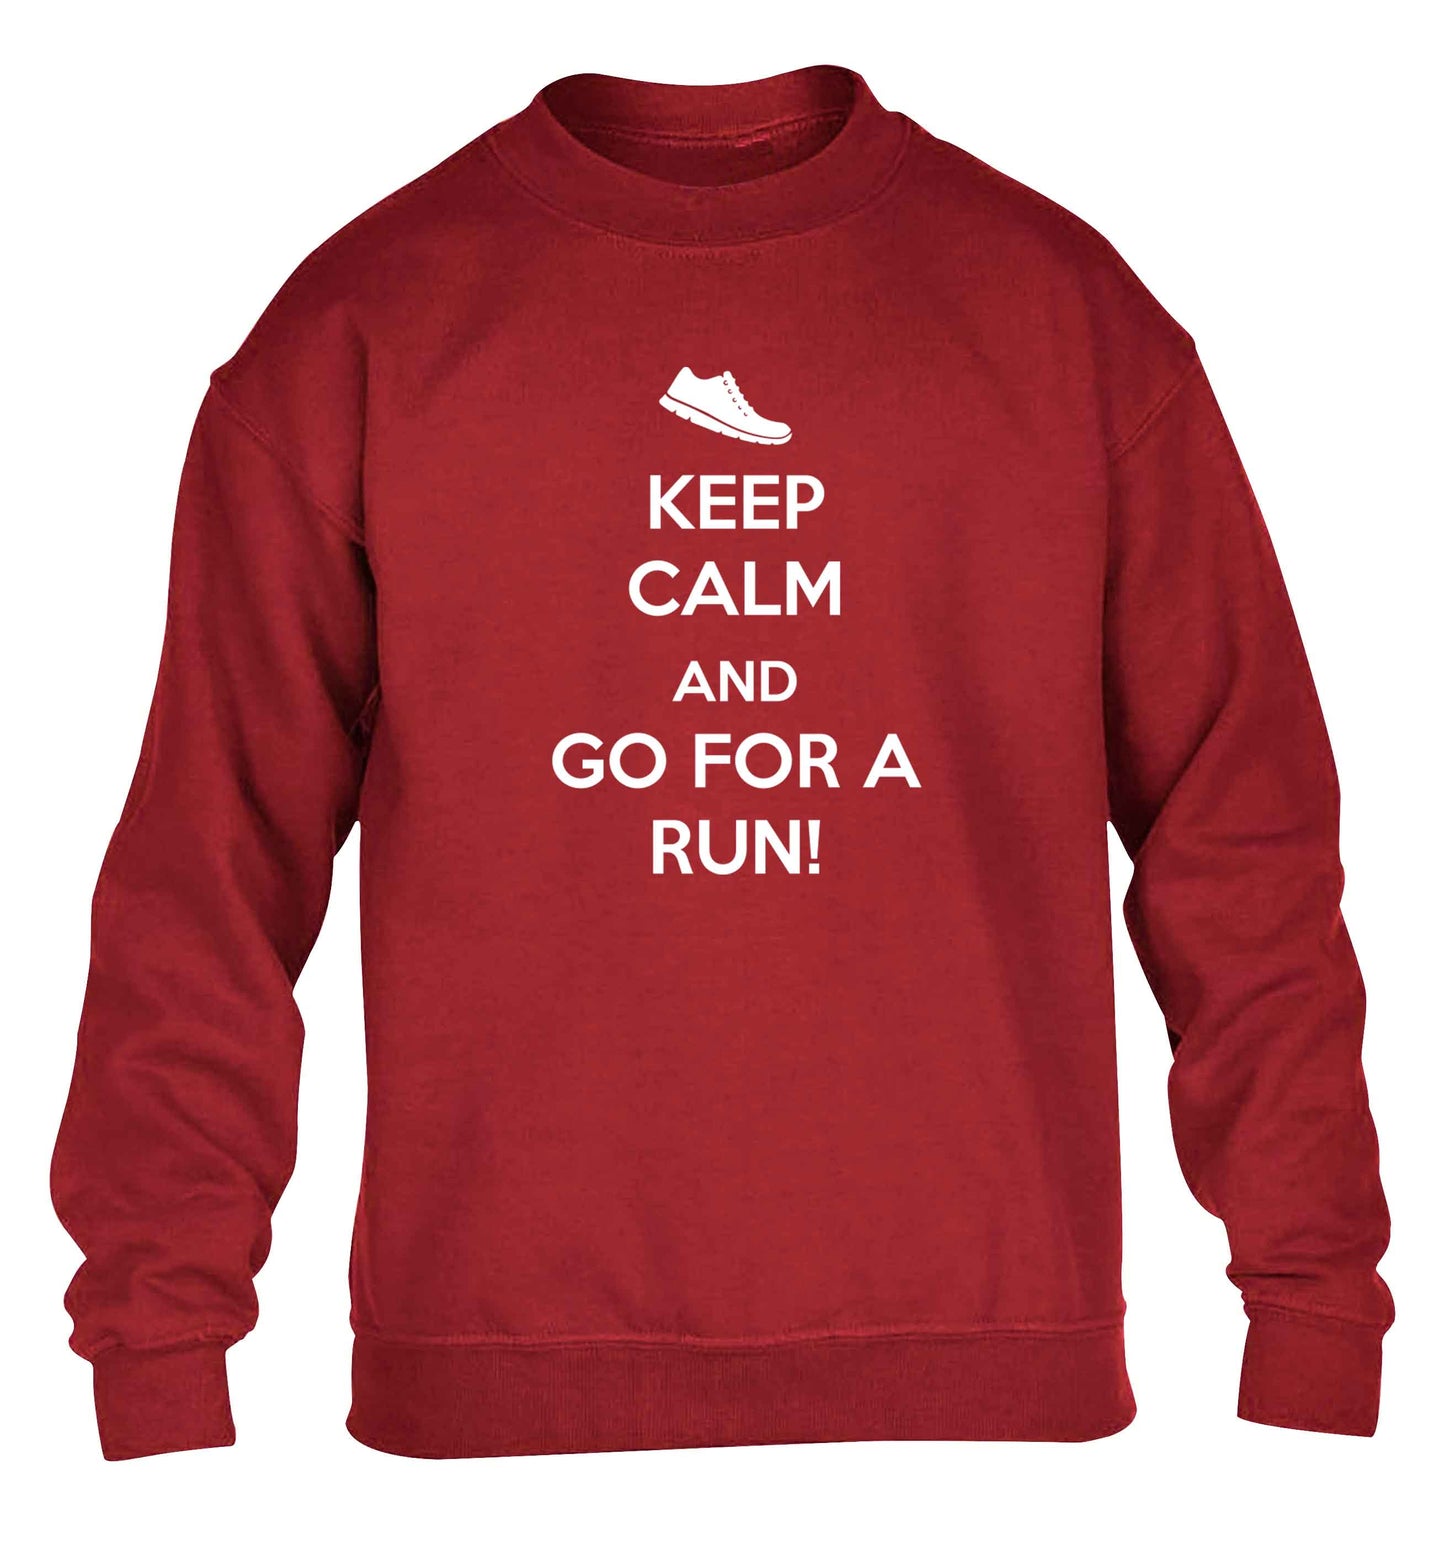 Keep calm and go for a run children's grey sweater 12-13 Years